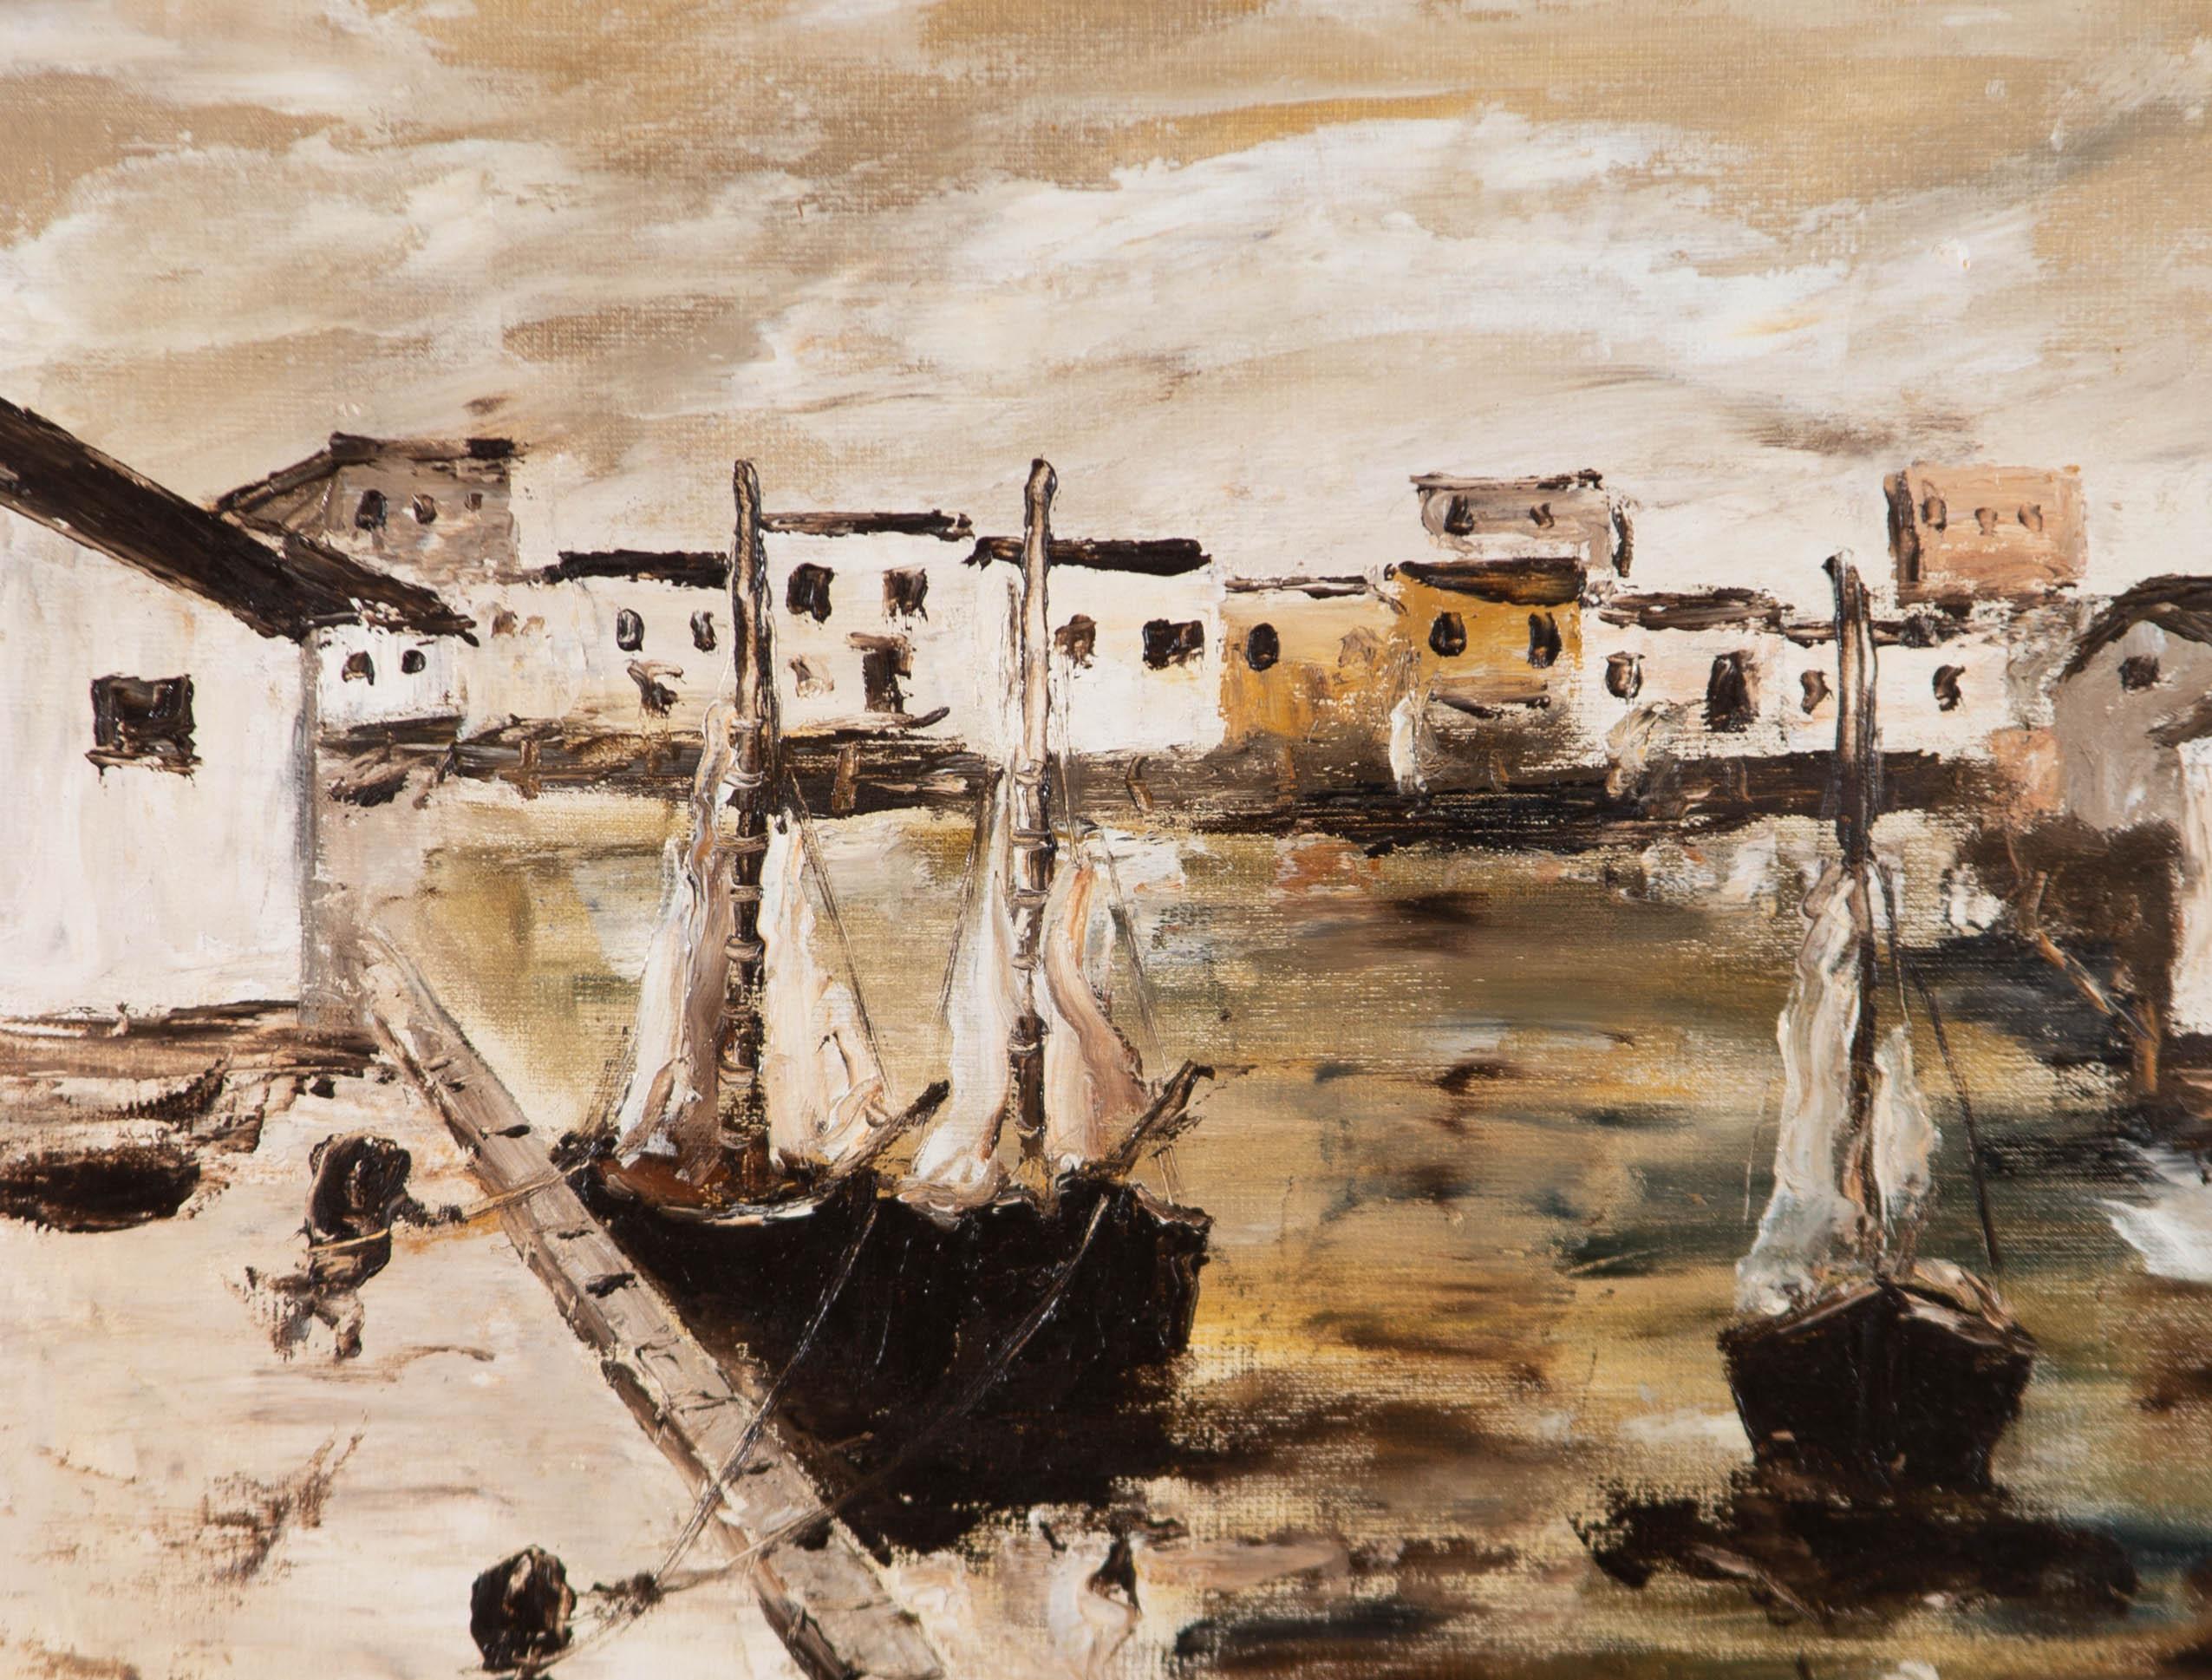 Contemporary Oil - Town View with Docked Boats - Painting by Unknown